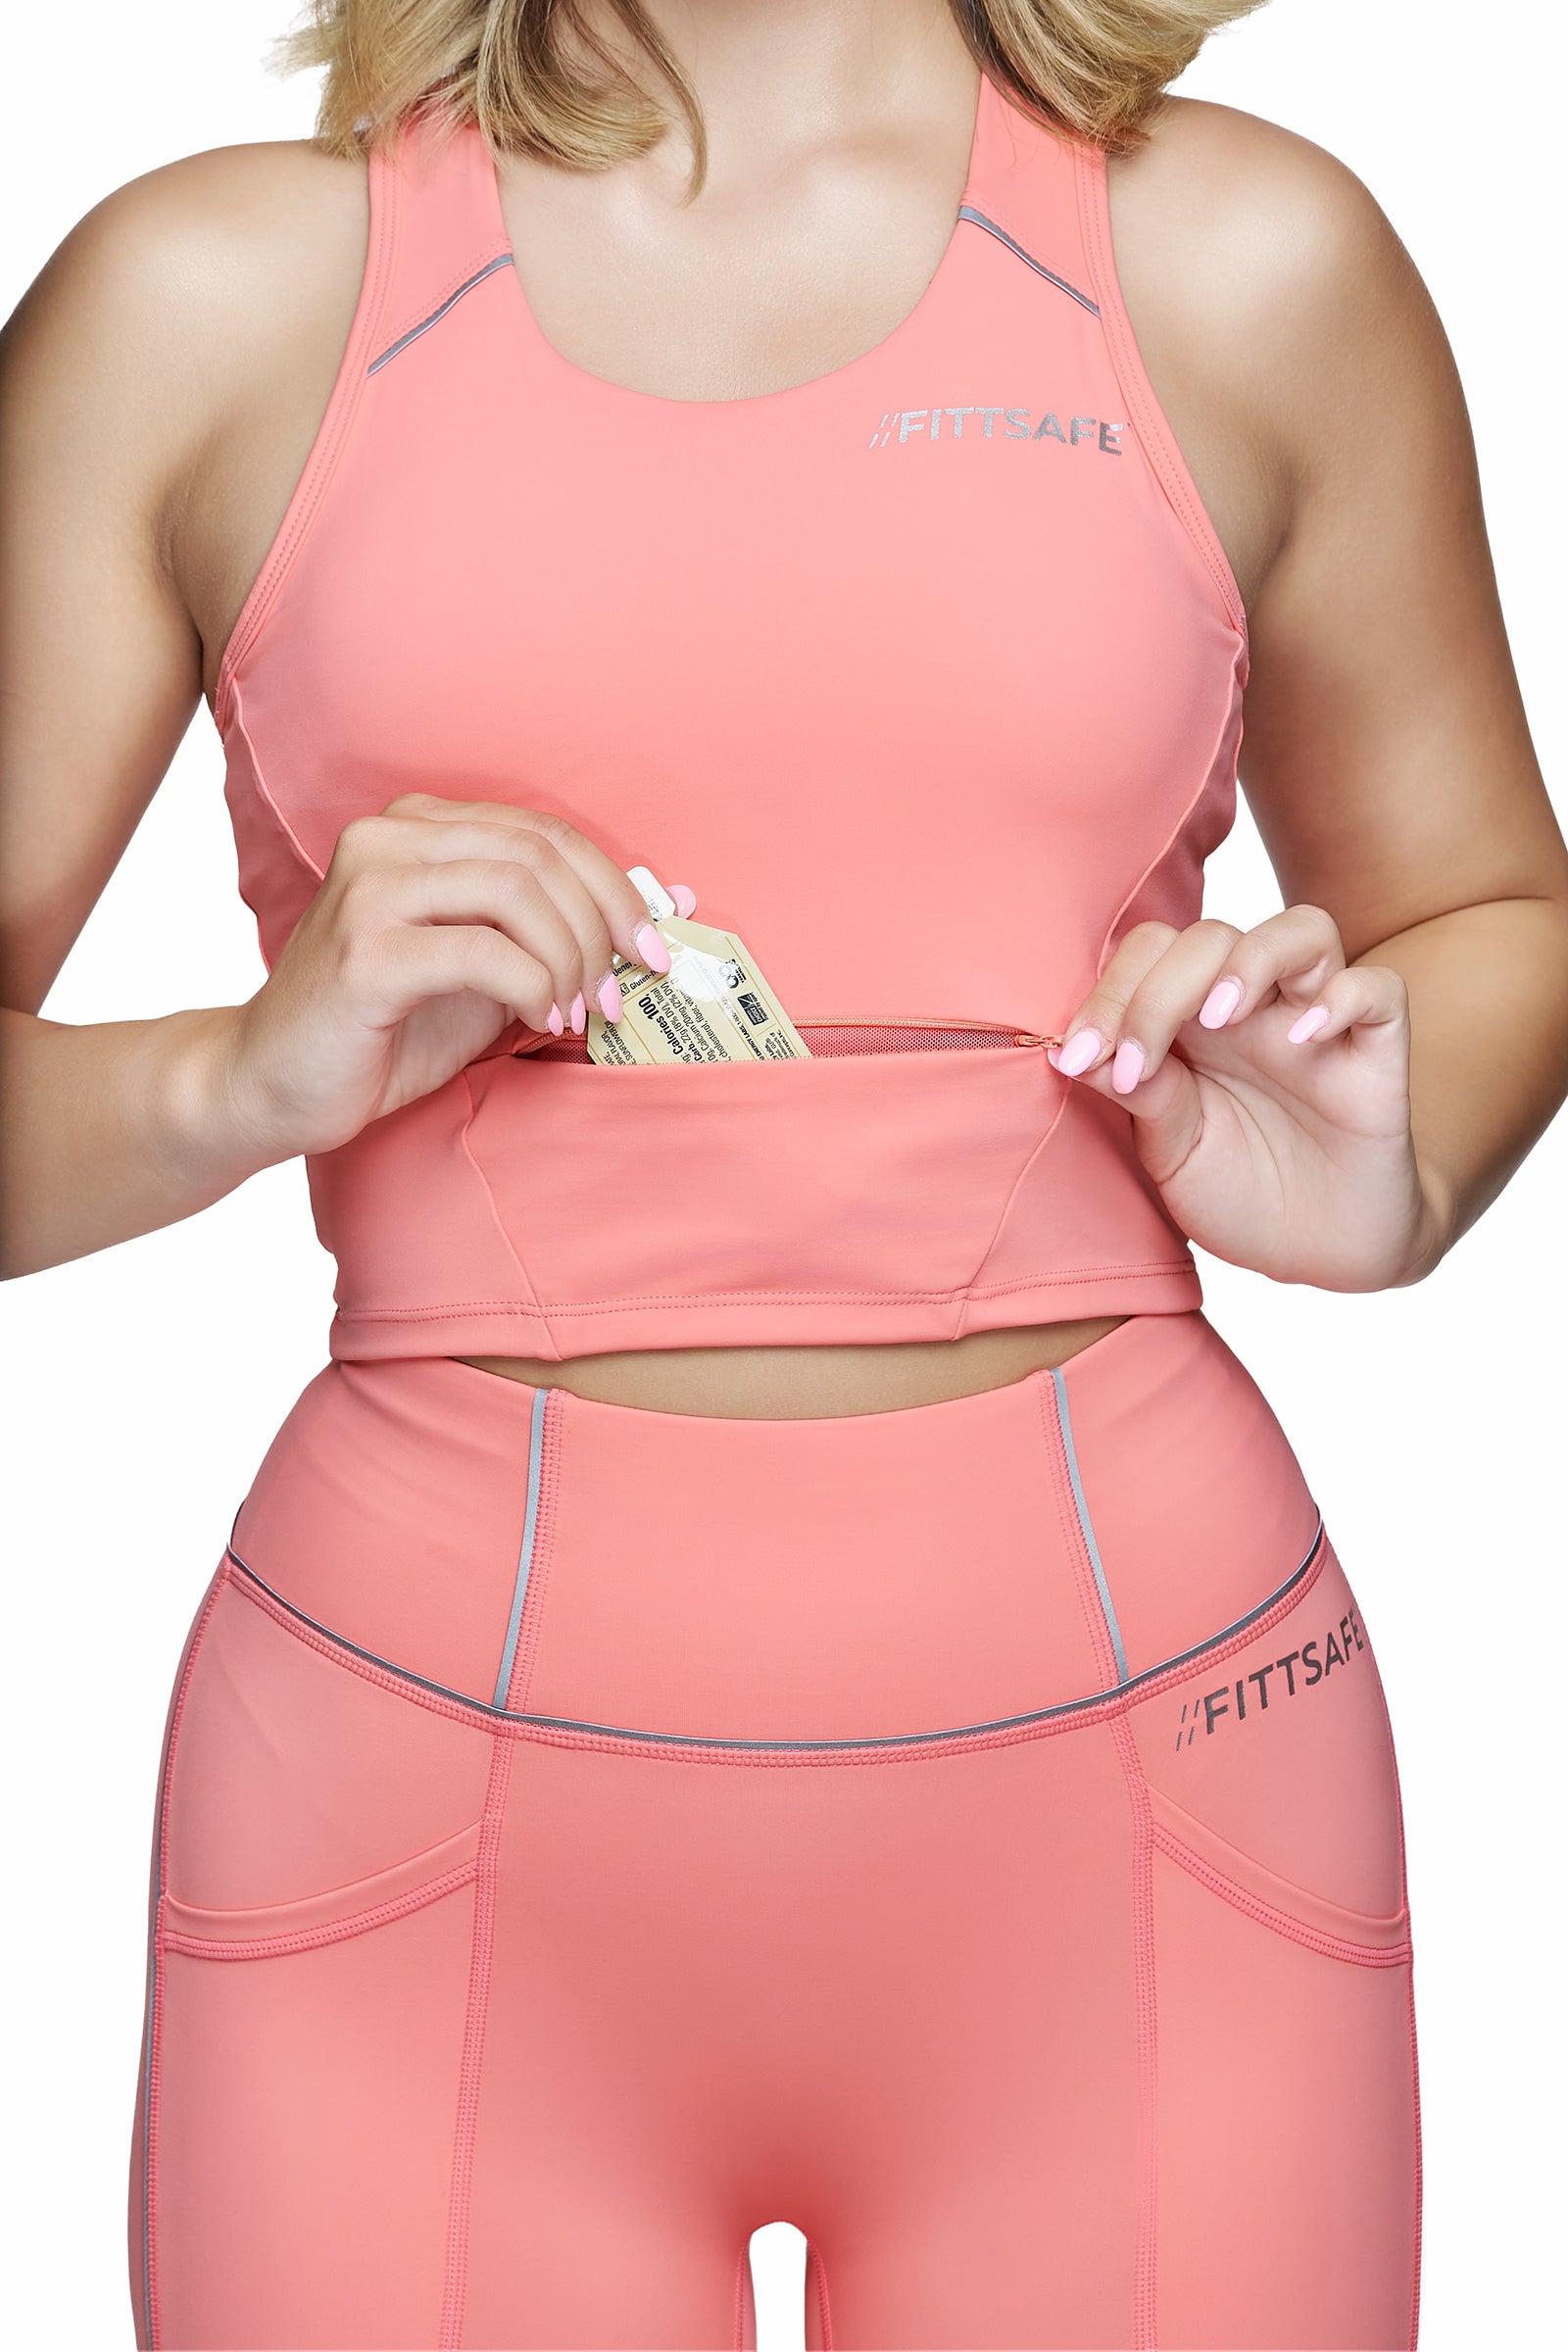 FittSafe Sports Bra with built in Pockets